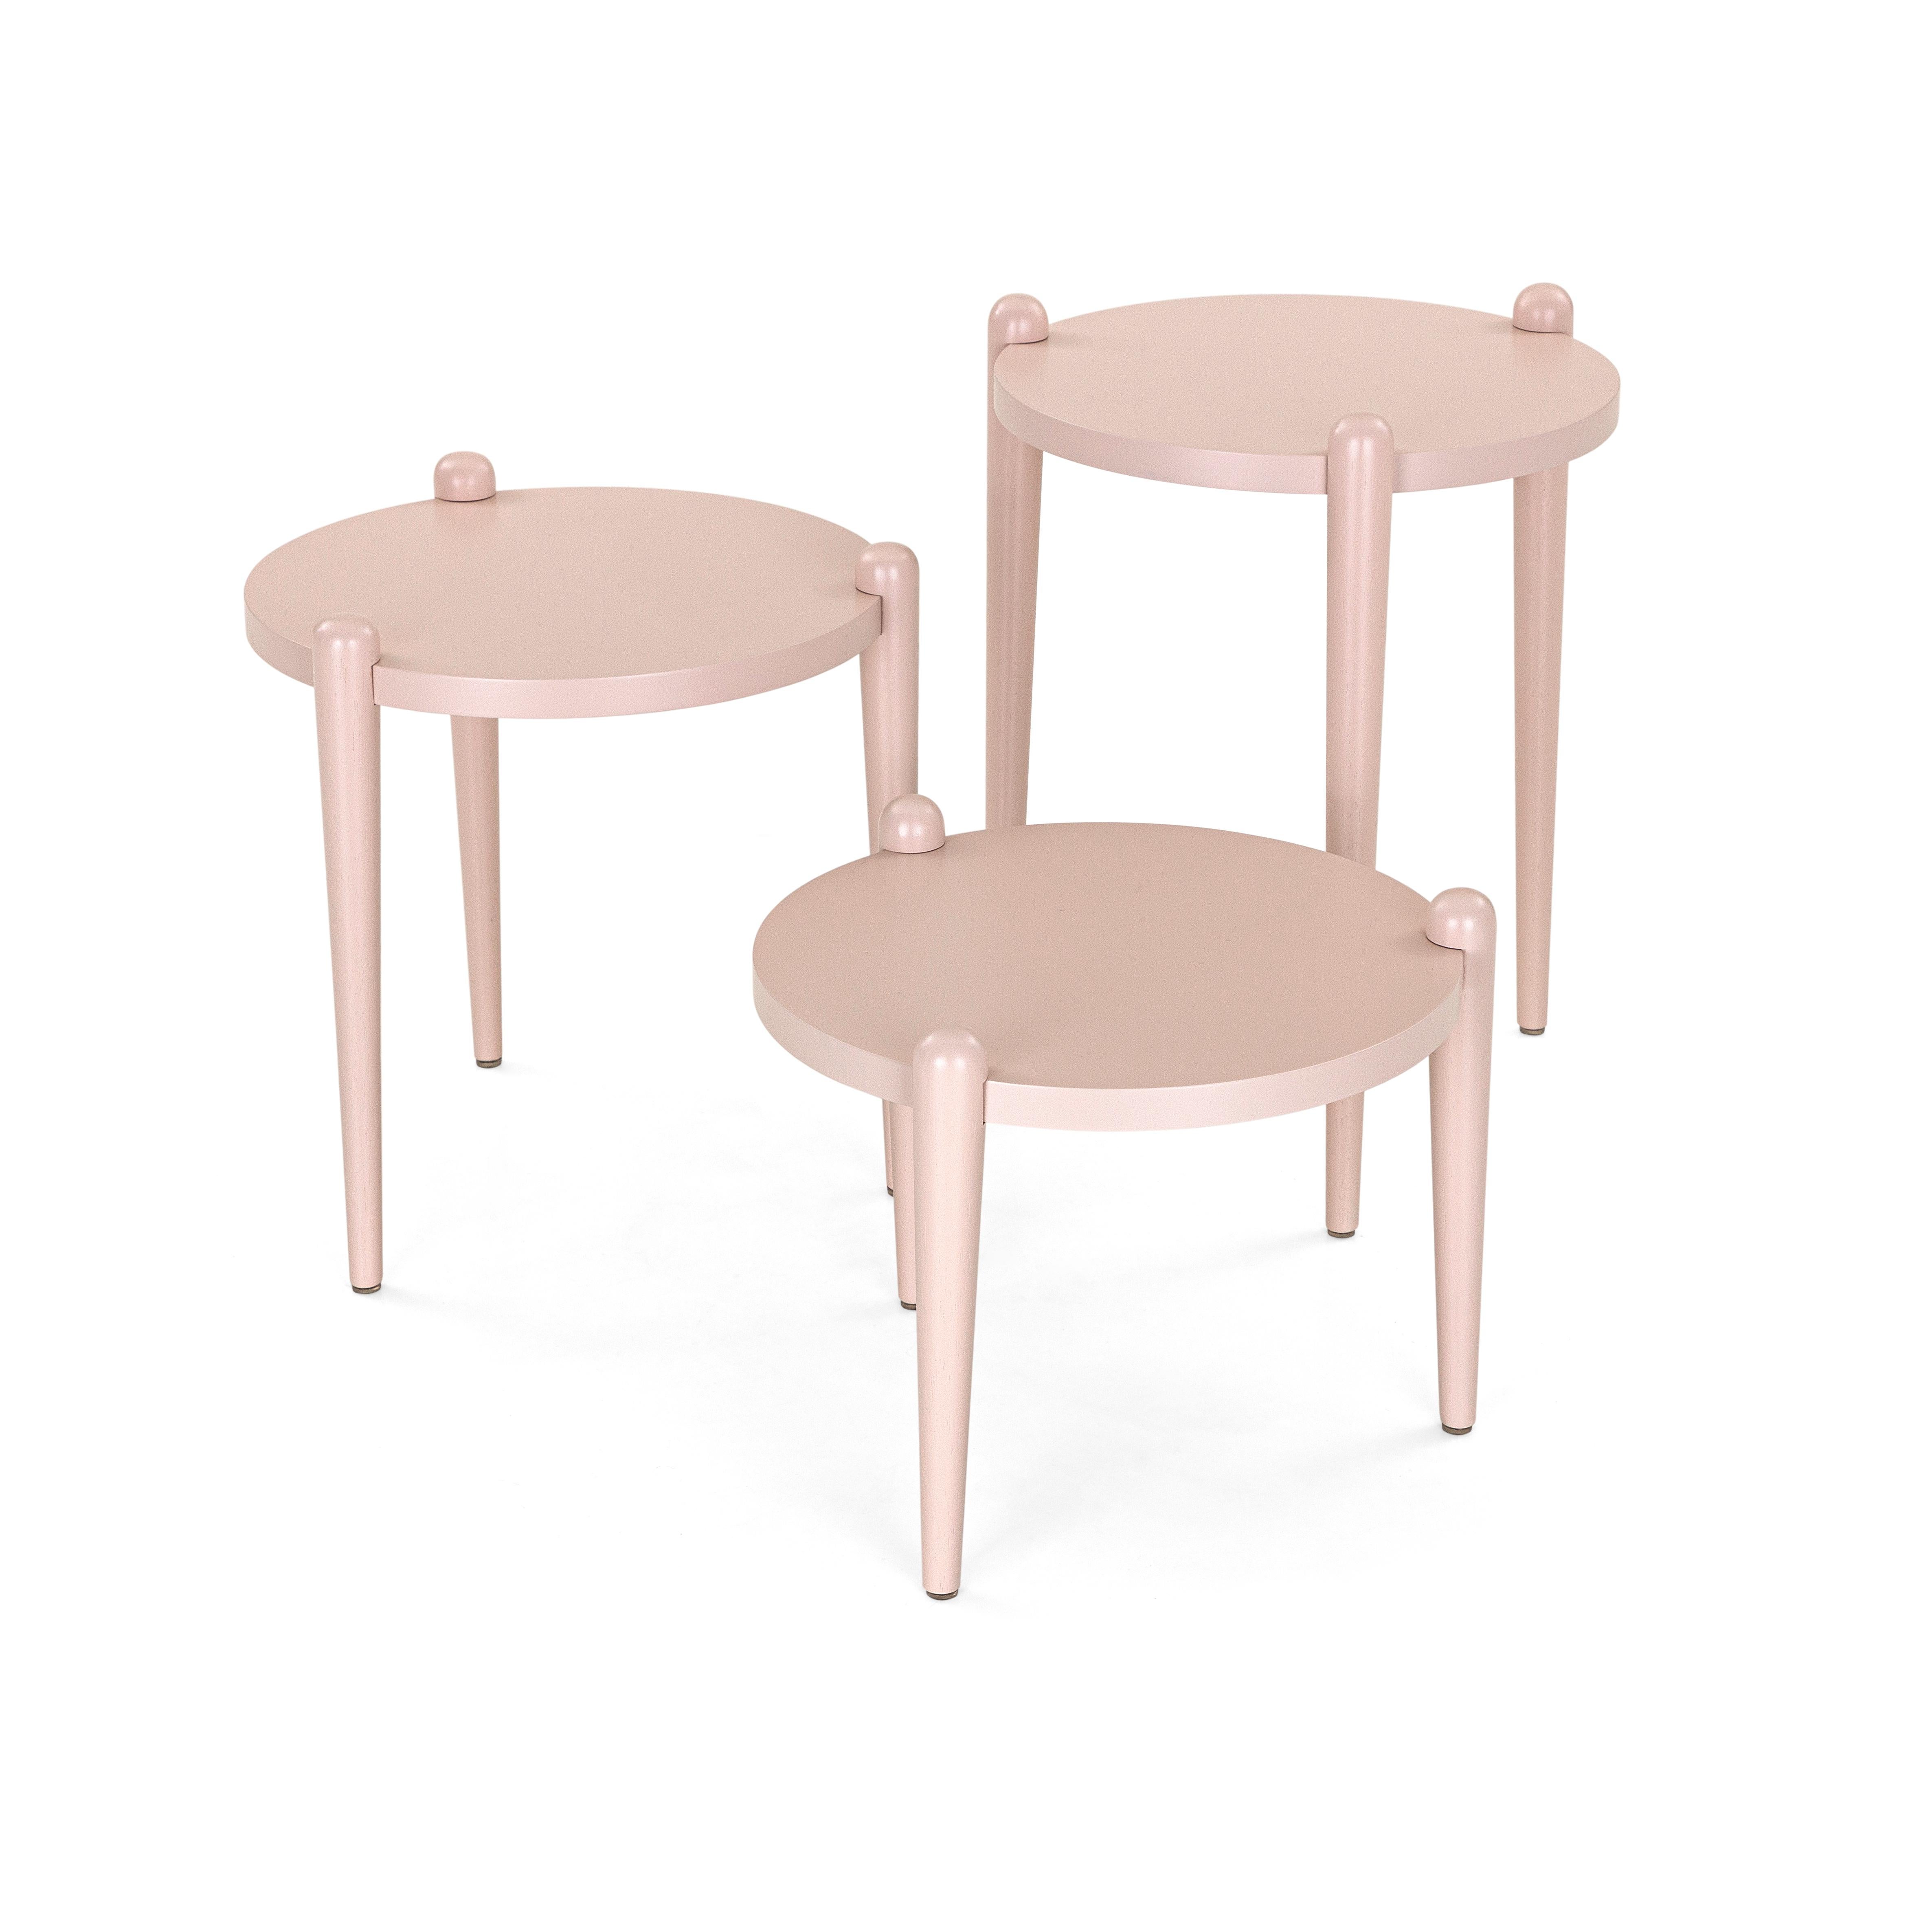 Pan Contemporary Side Tables in Light Pink Quartz Finish, Set of 3 For Sale 1